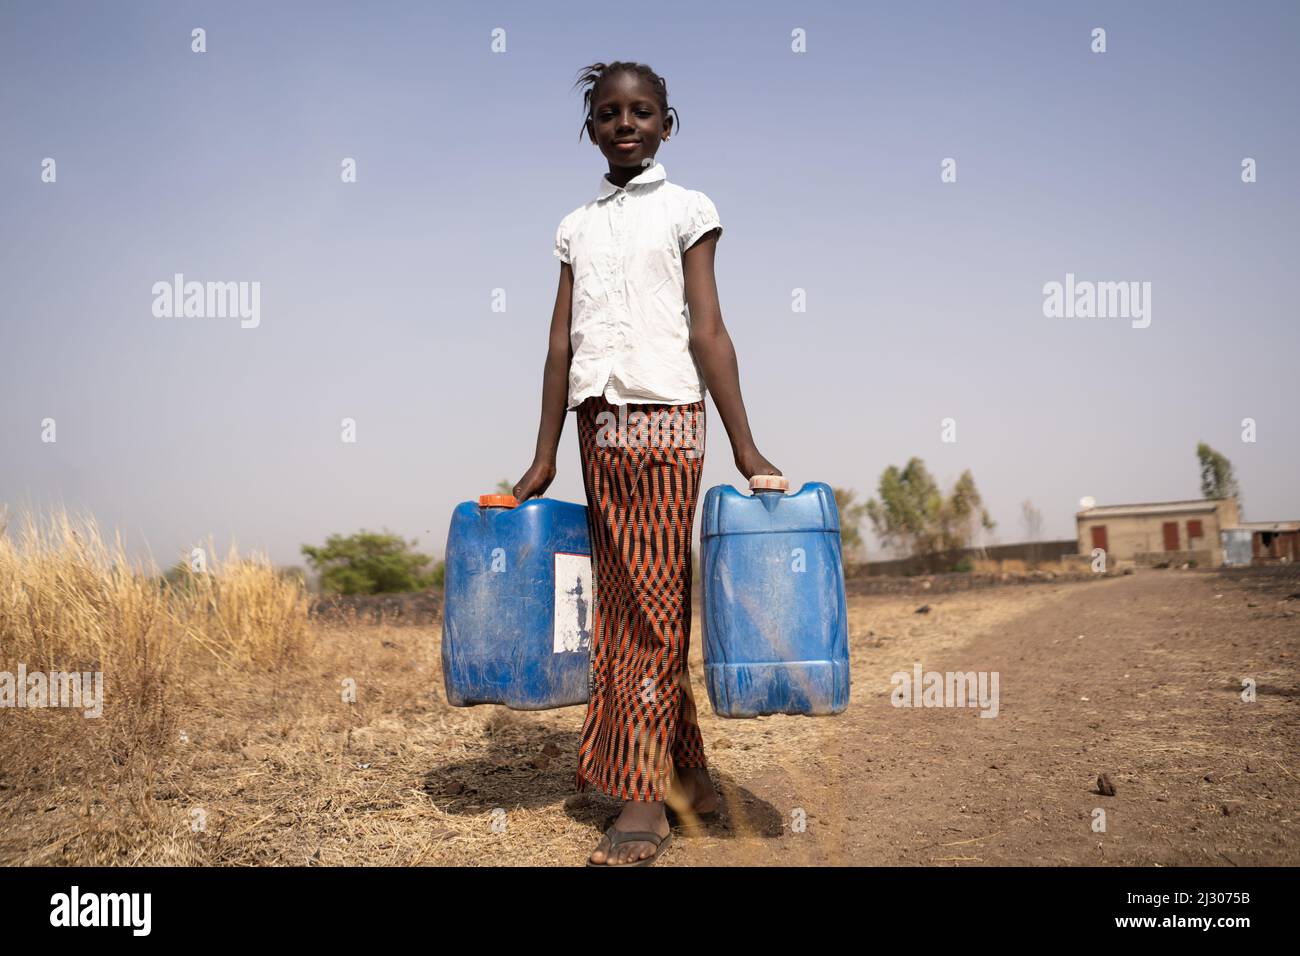 Skinny African girl carrying two water containers in the middle of an arid landscape; concept of poverty, lack of pipe connections in private rural ho Stock Photo